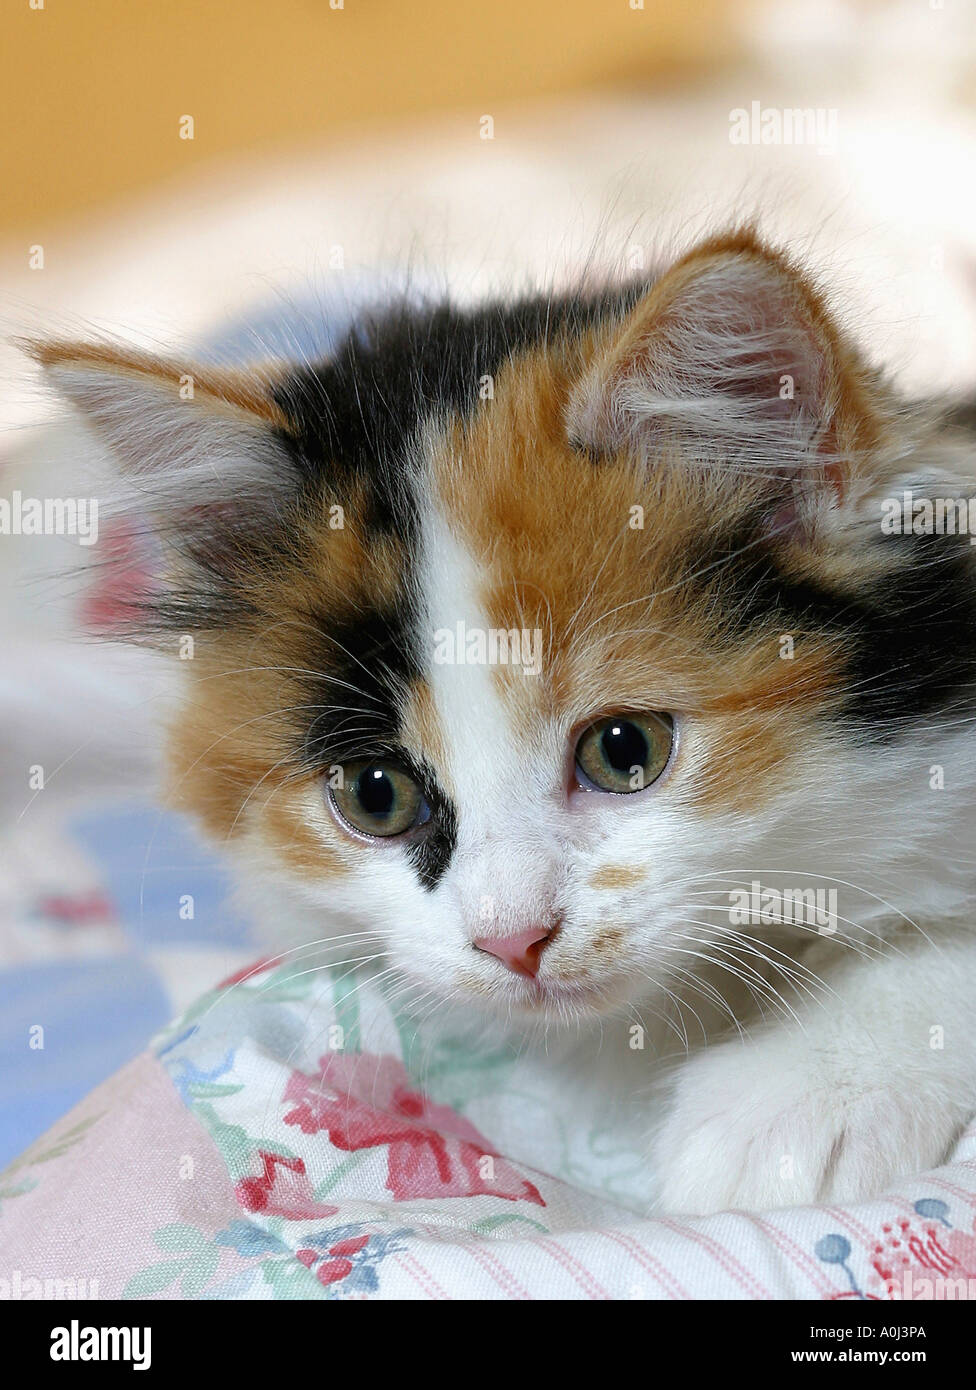 Close-up of a kitten Stock Photo